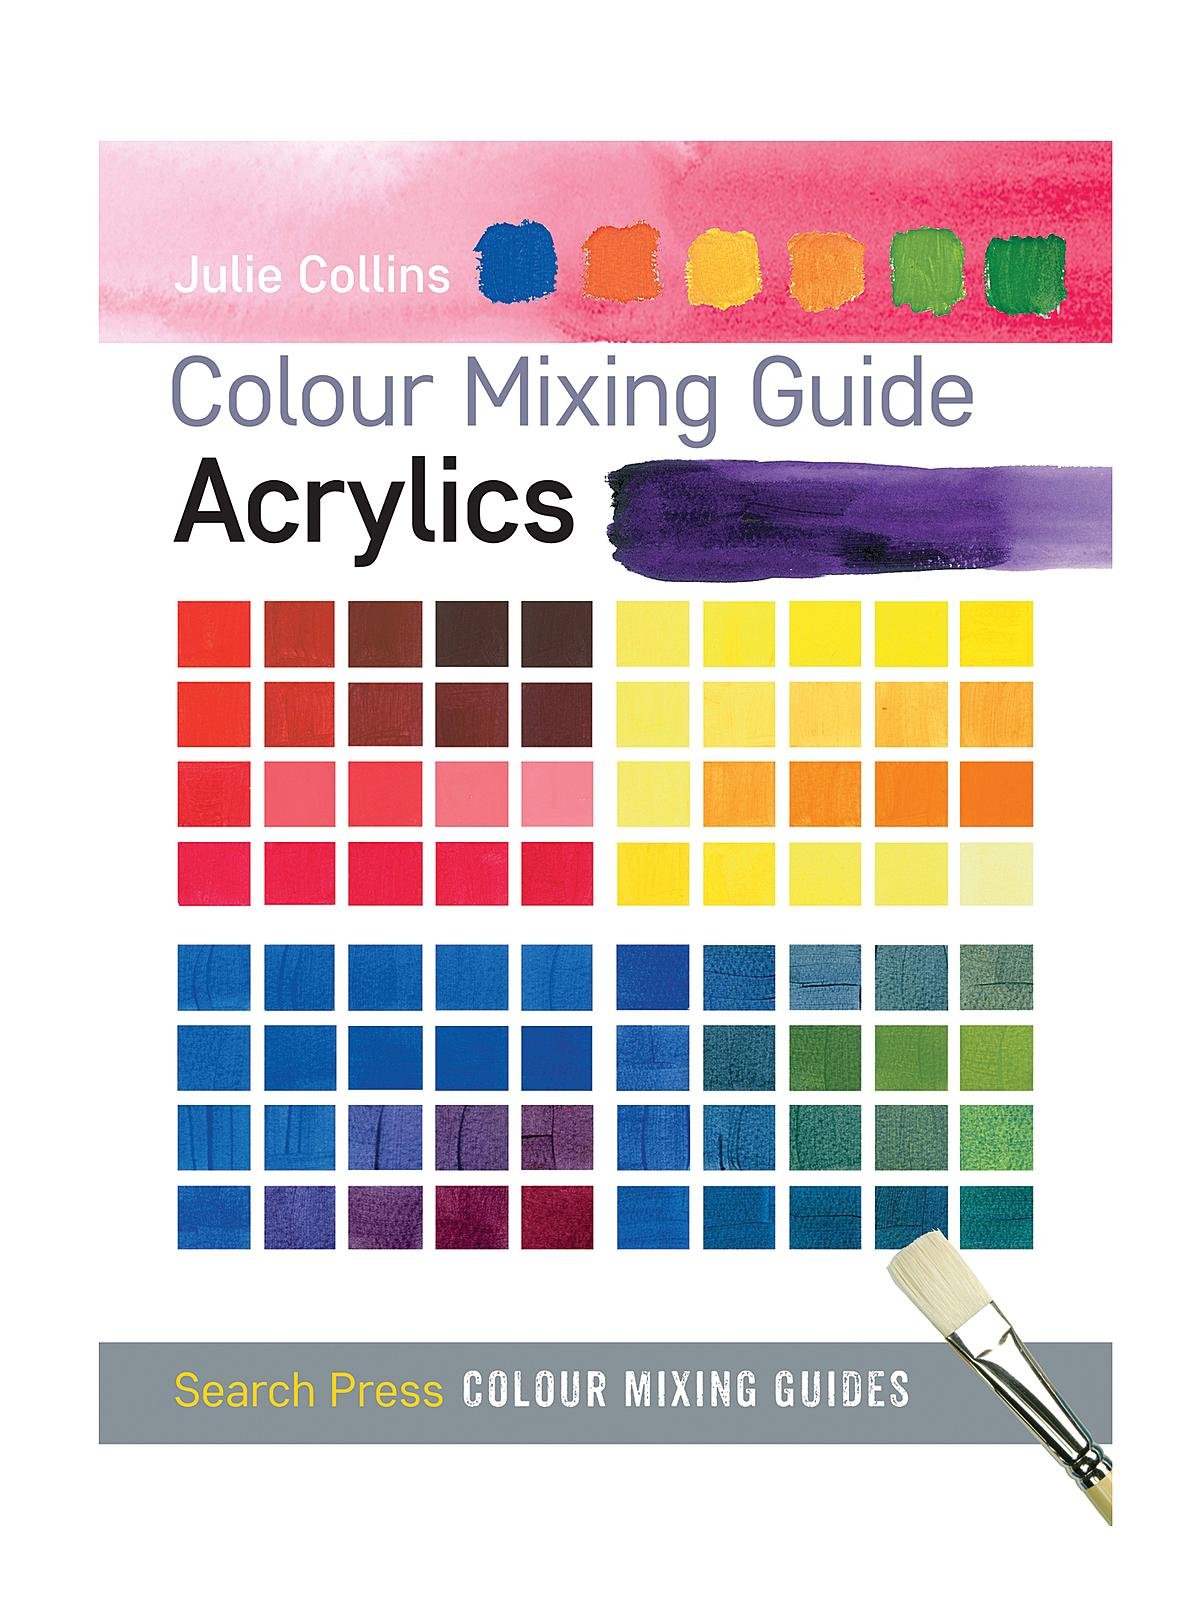 Search Press - Colour Mixing Guide: Acrylics